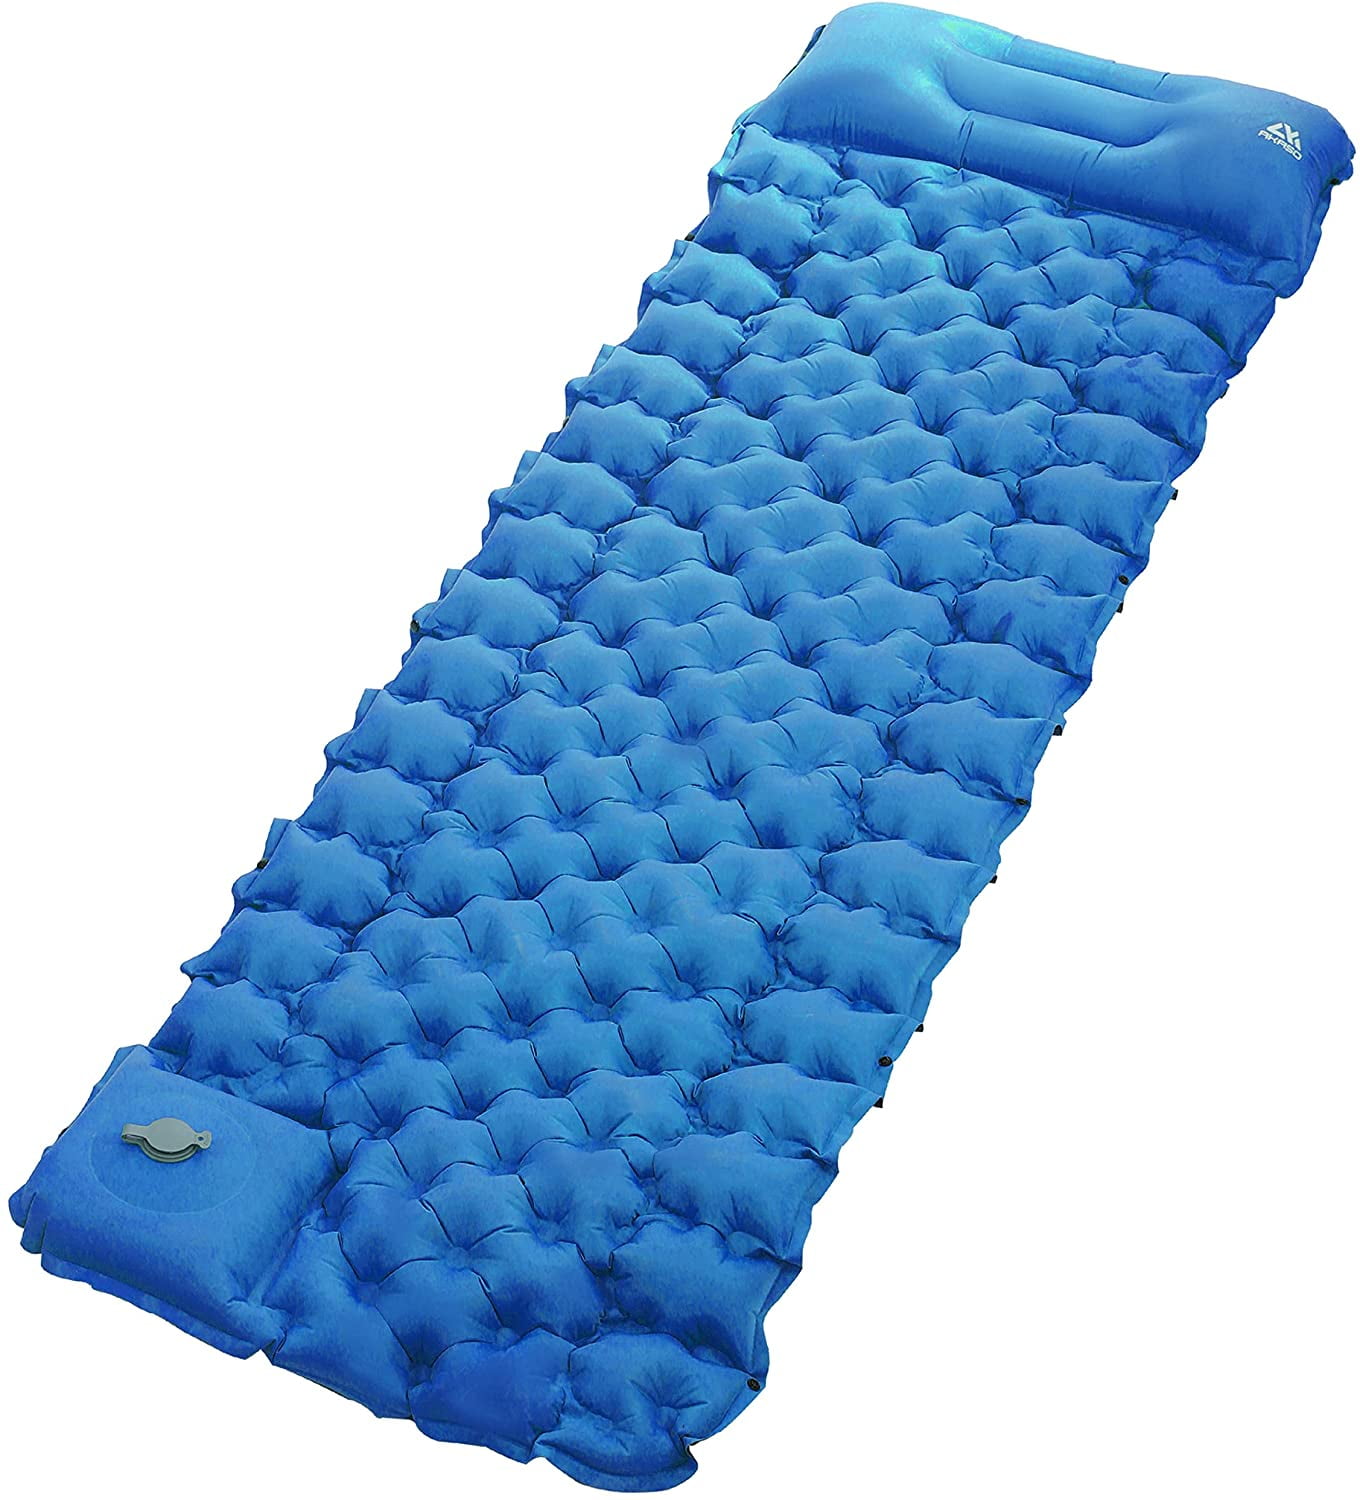 Camping femor Sleeping Pad Inflatable Camping Pad with Comfortable Air-Support Cells Design for Hiking Backpacking Traveling 